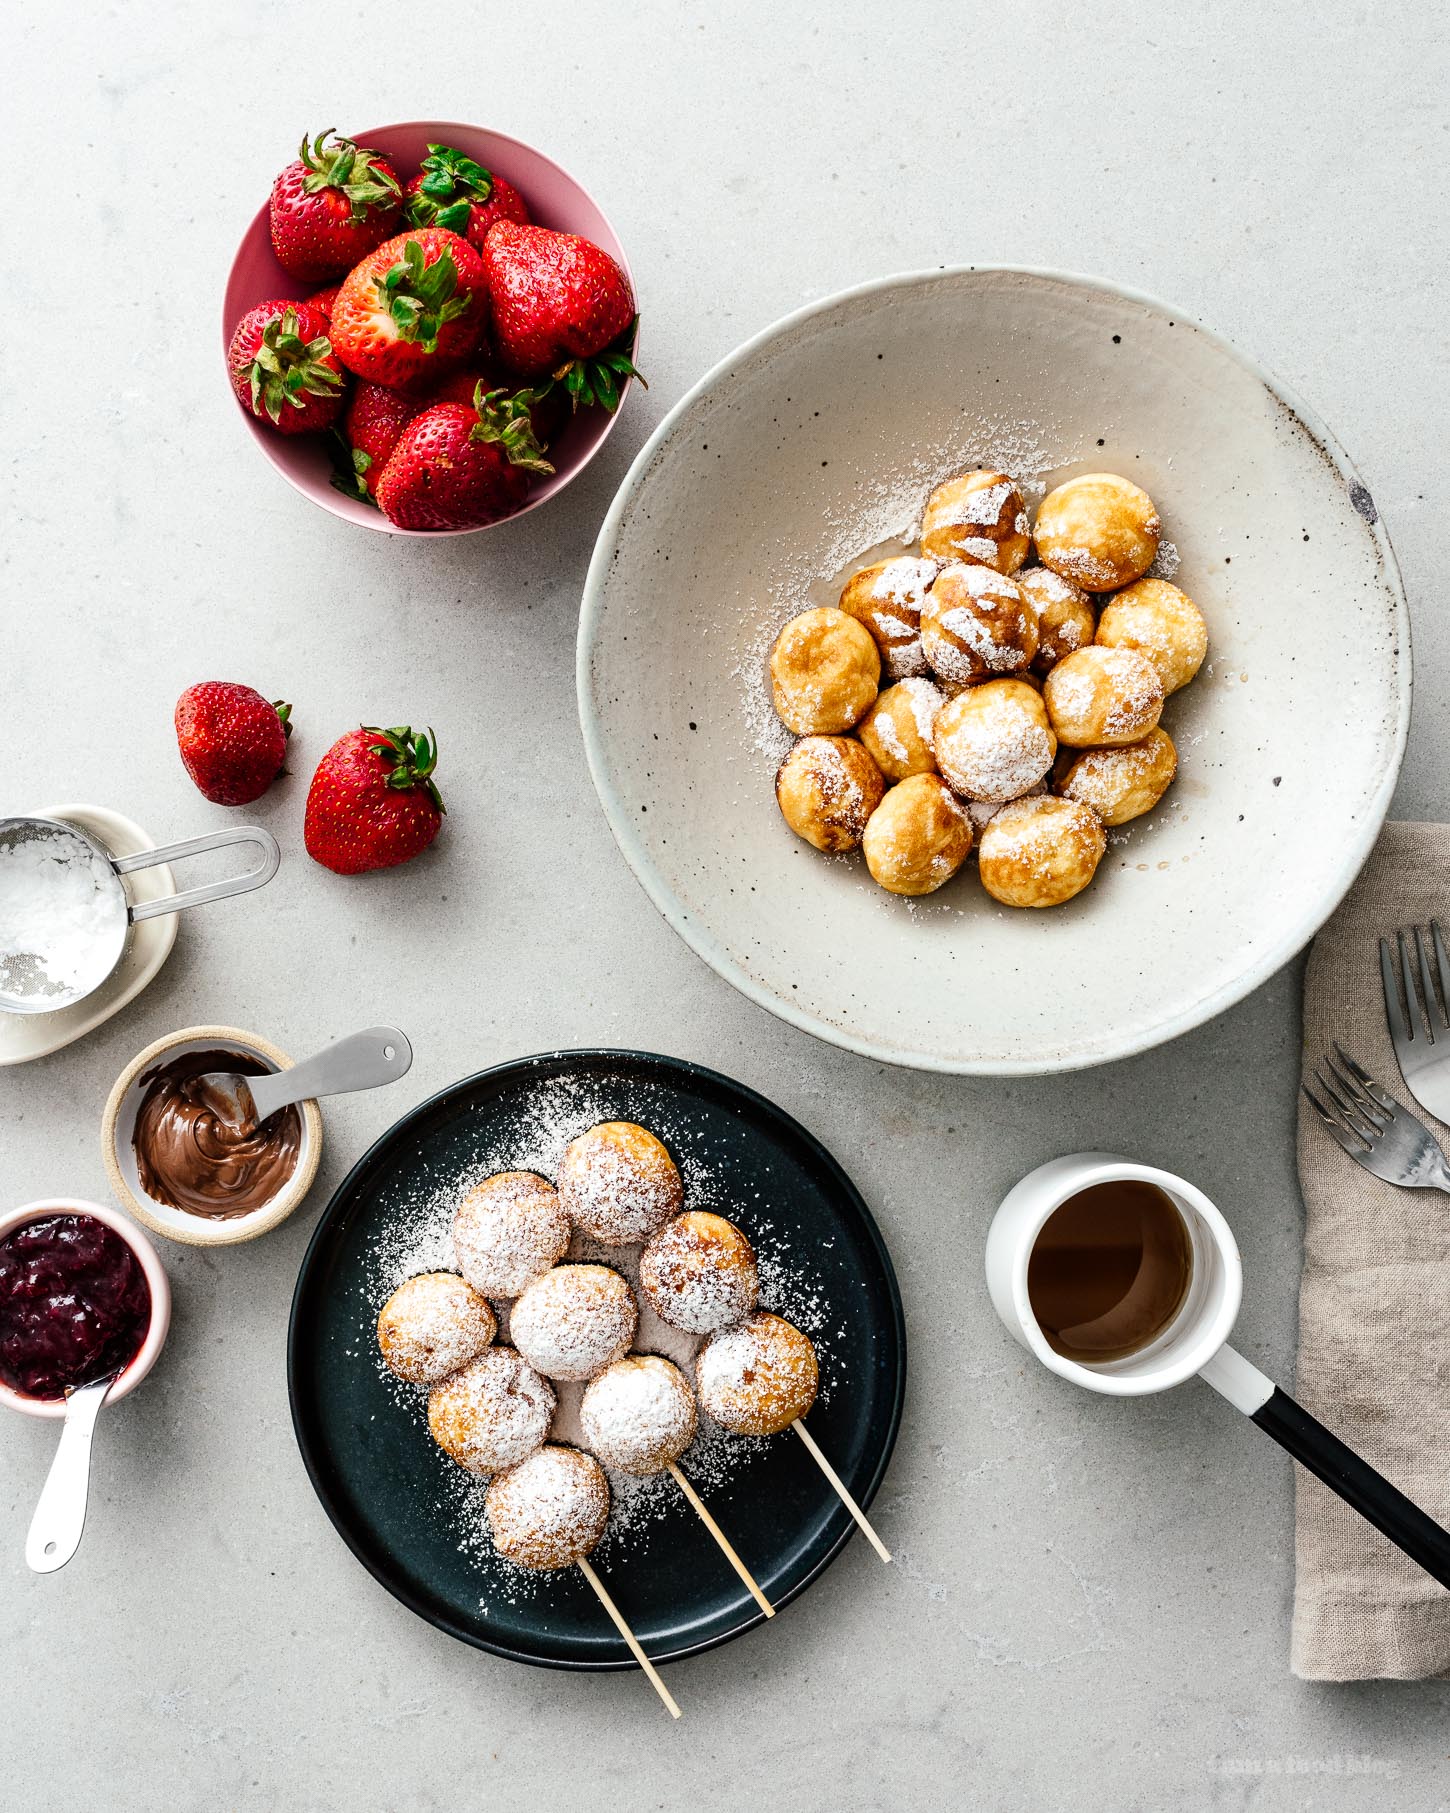 Make Danish aebleskiver at home for the ultimate brunch! Pancakes never looked so cute :) #pancakes #brunch #breakfast #recipes #brunchrecipes #cutefood #pancakeballs #aebleskiver #danish